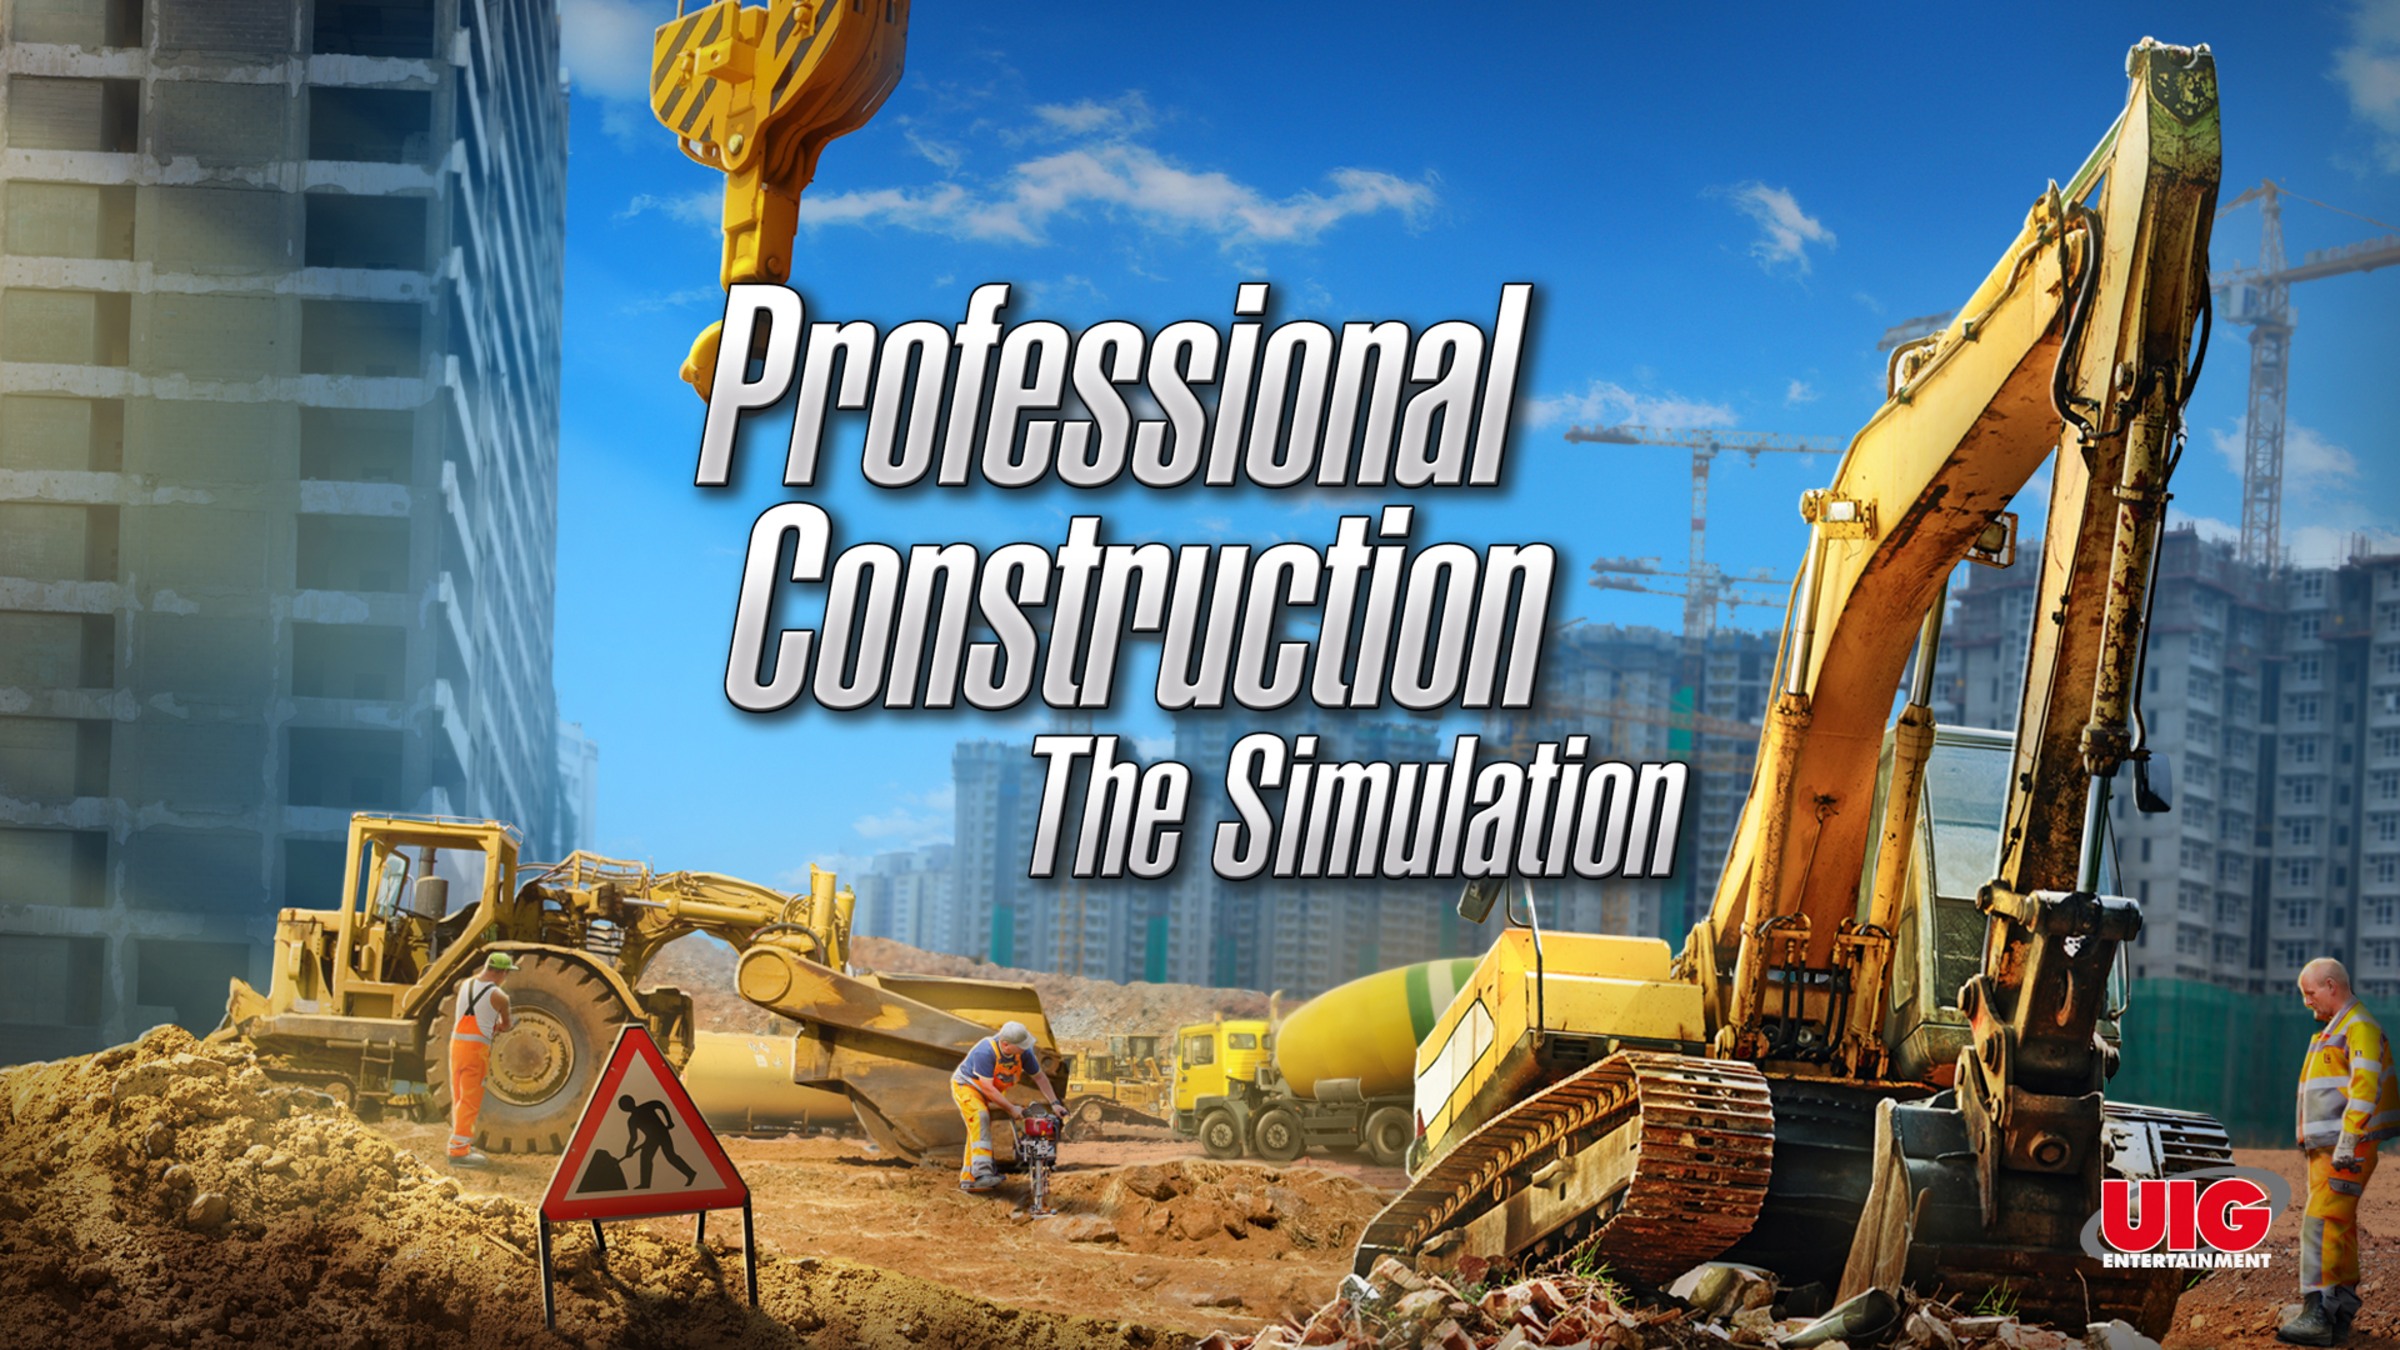 Professional Construction – The Simulation for Nintendo Switch - Nintendo